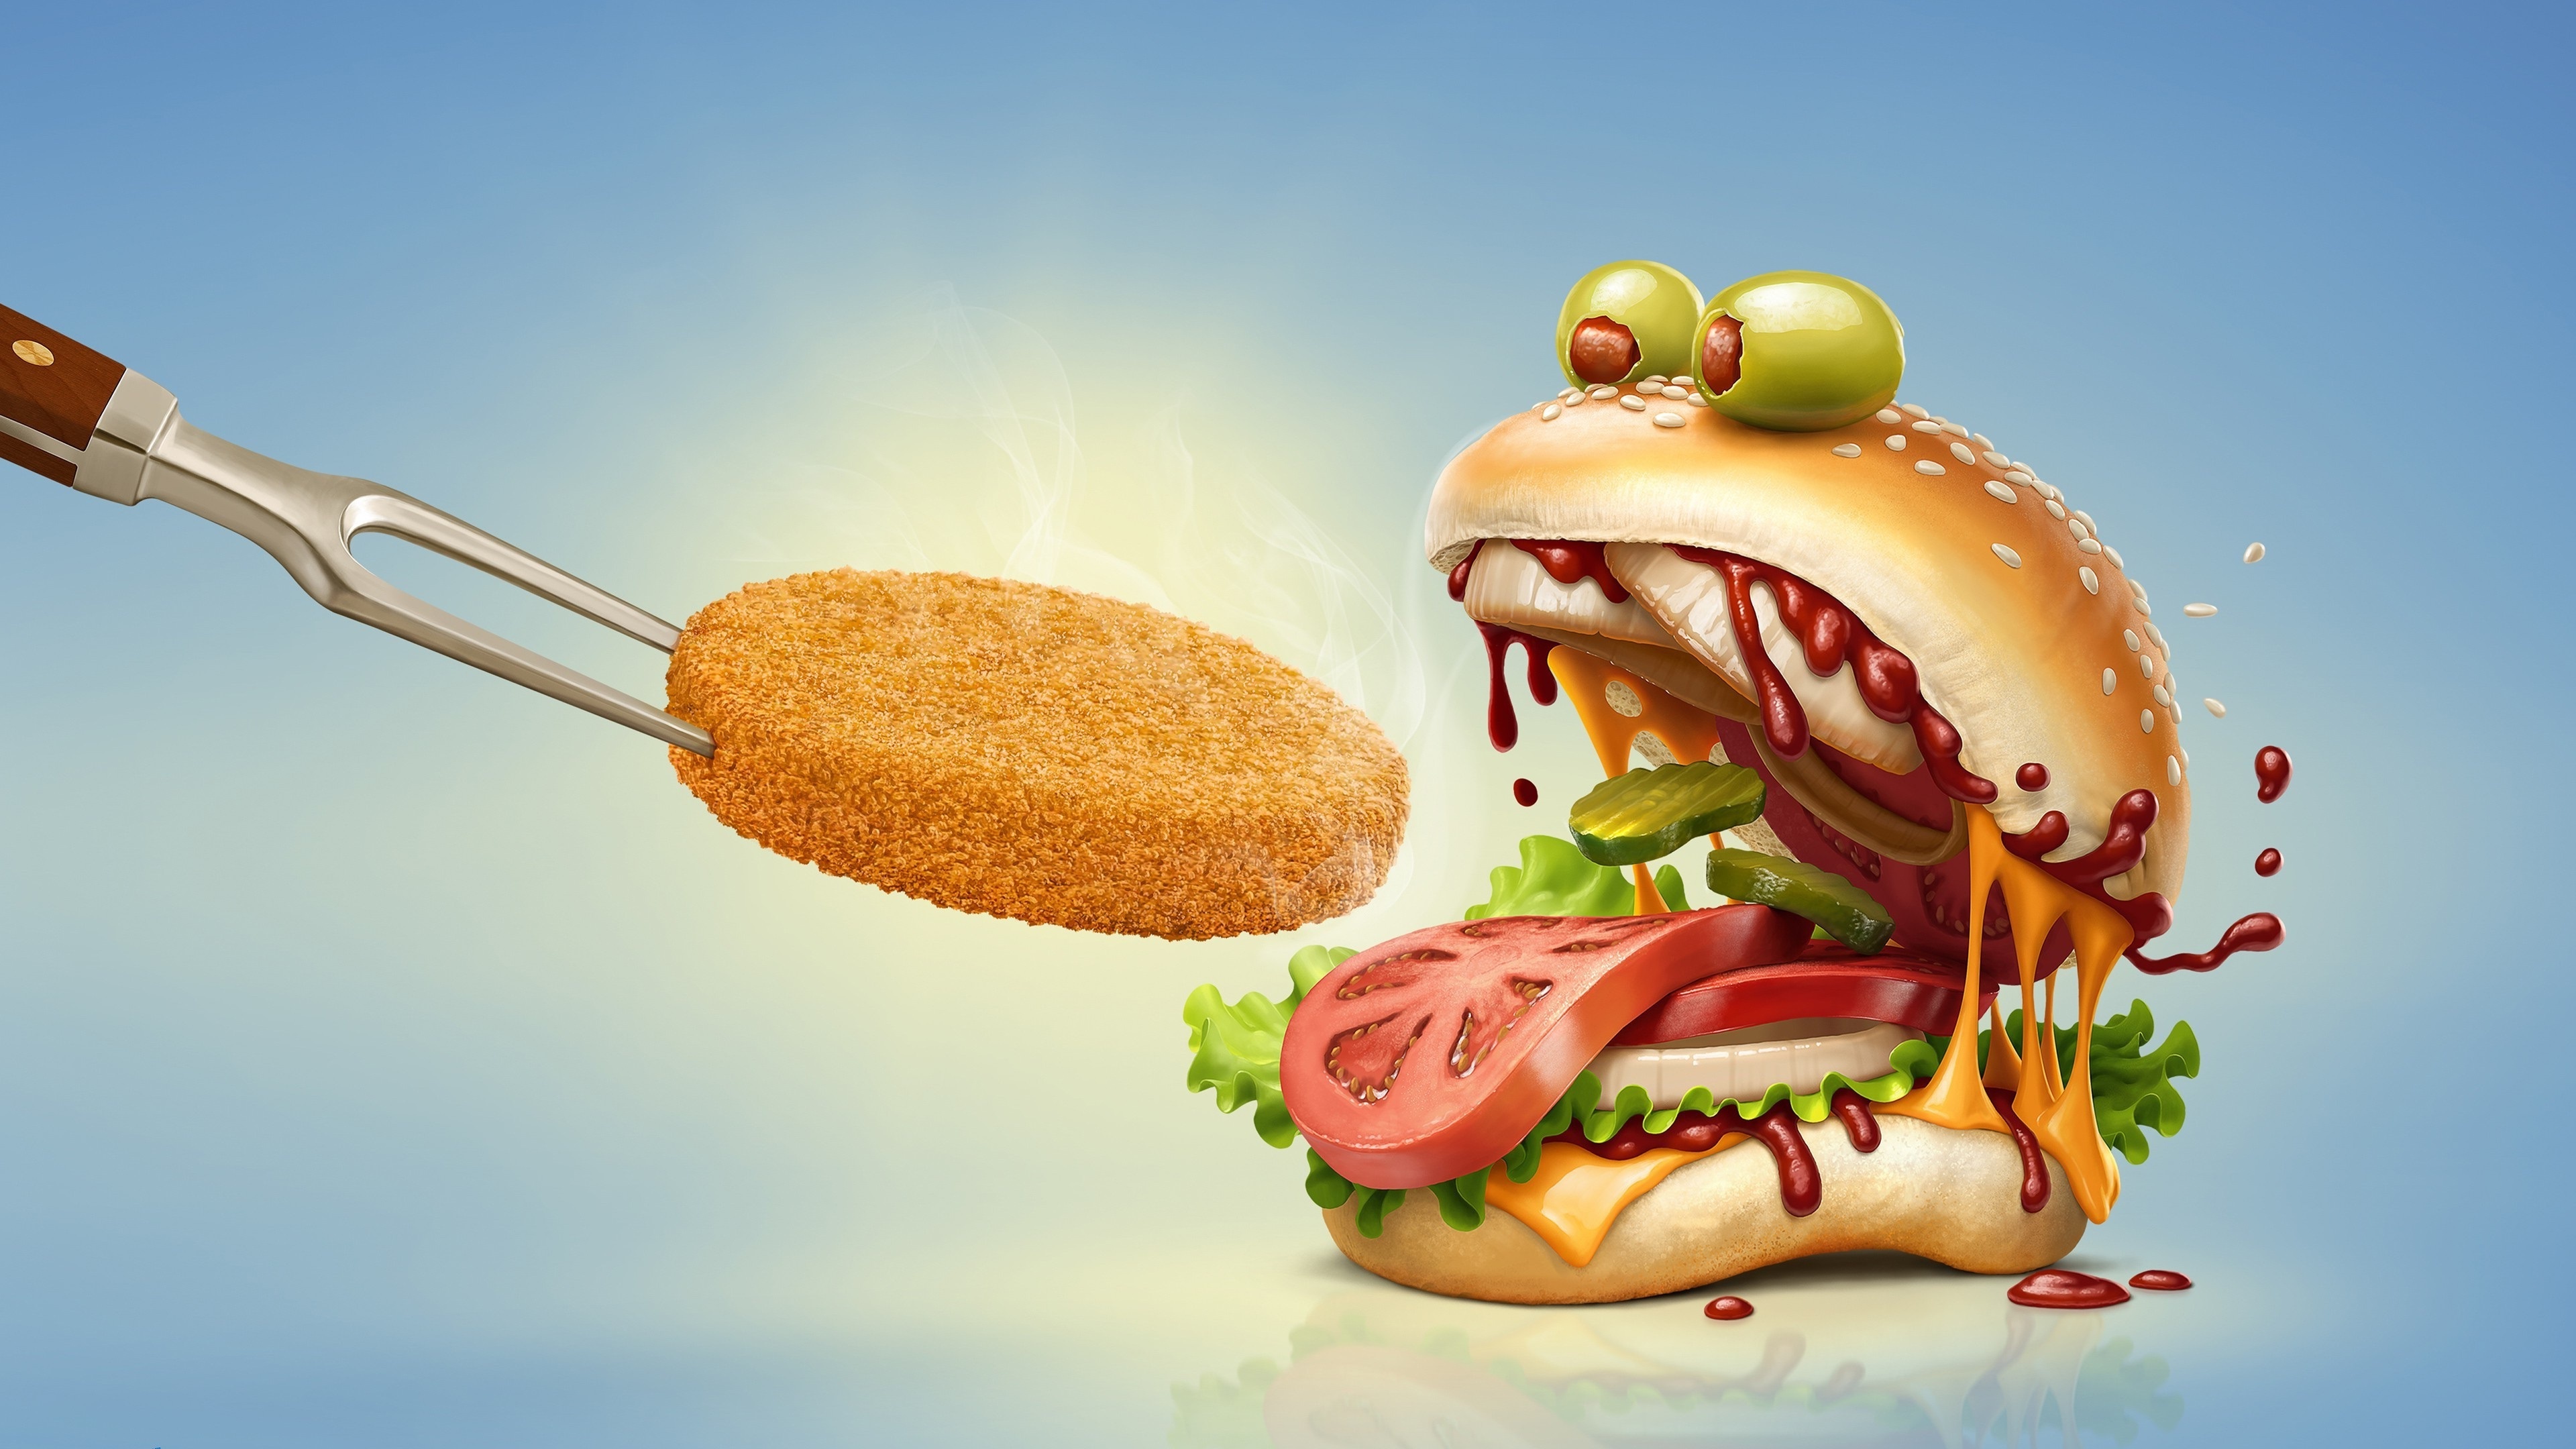 Hamburger: Sesame seed buns, Patty topped with cheese, Cuisine. 3840x2160 4K Wallpaper.